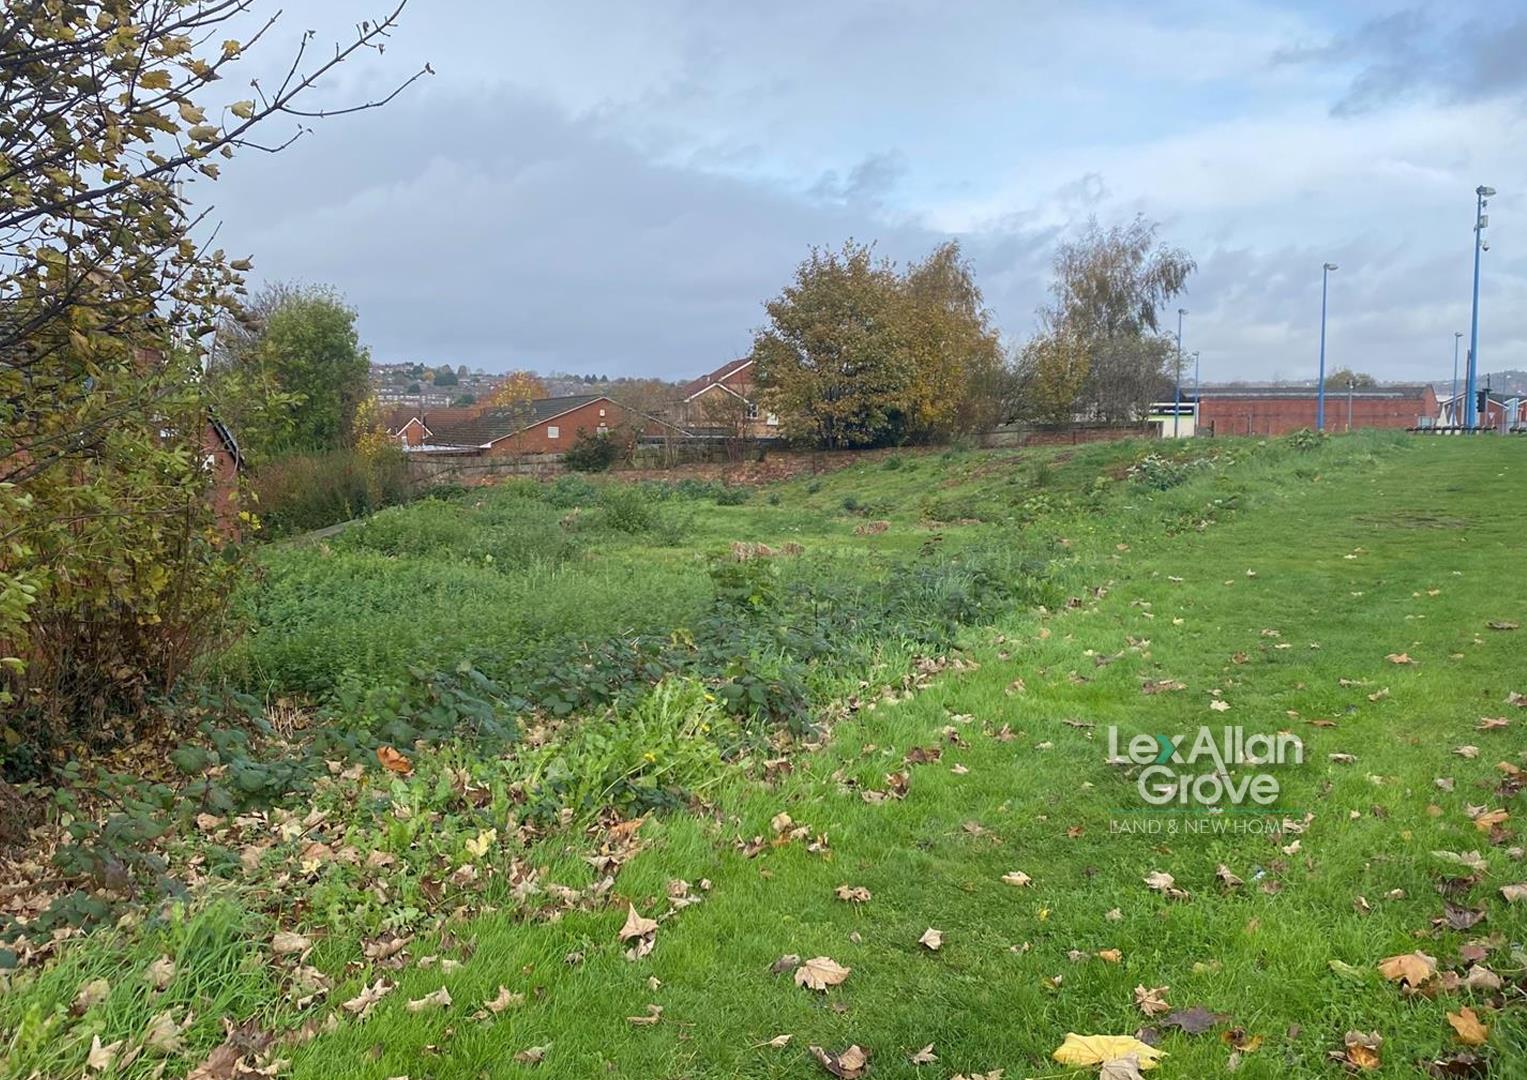 Land (residential) for sale - Property Image 1